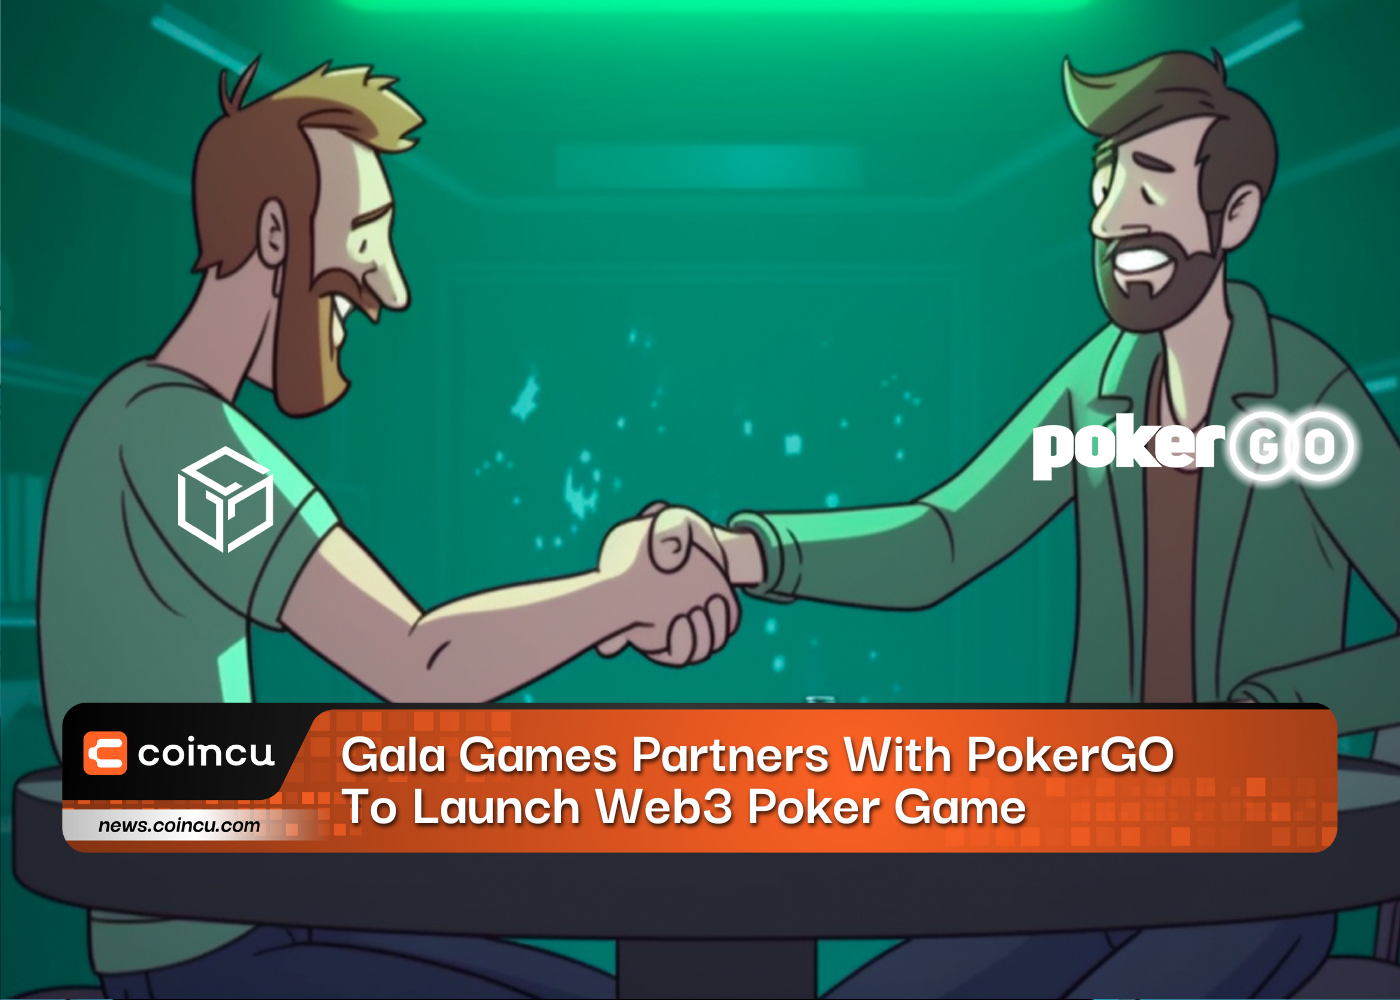 Gala Games Partners With PokerGO To Launch Web3 Poker Game